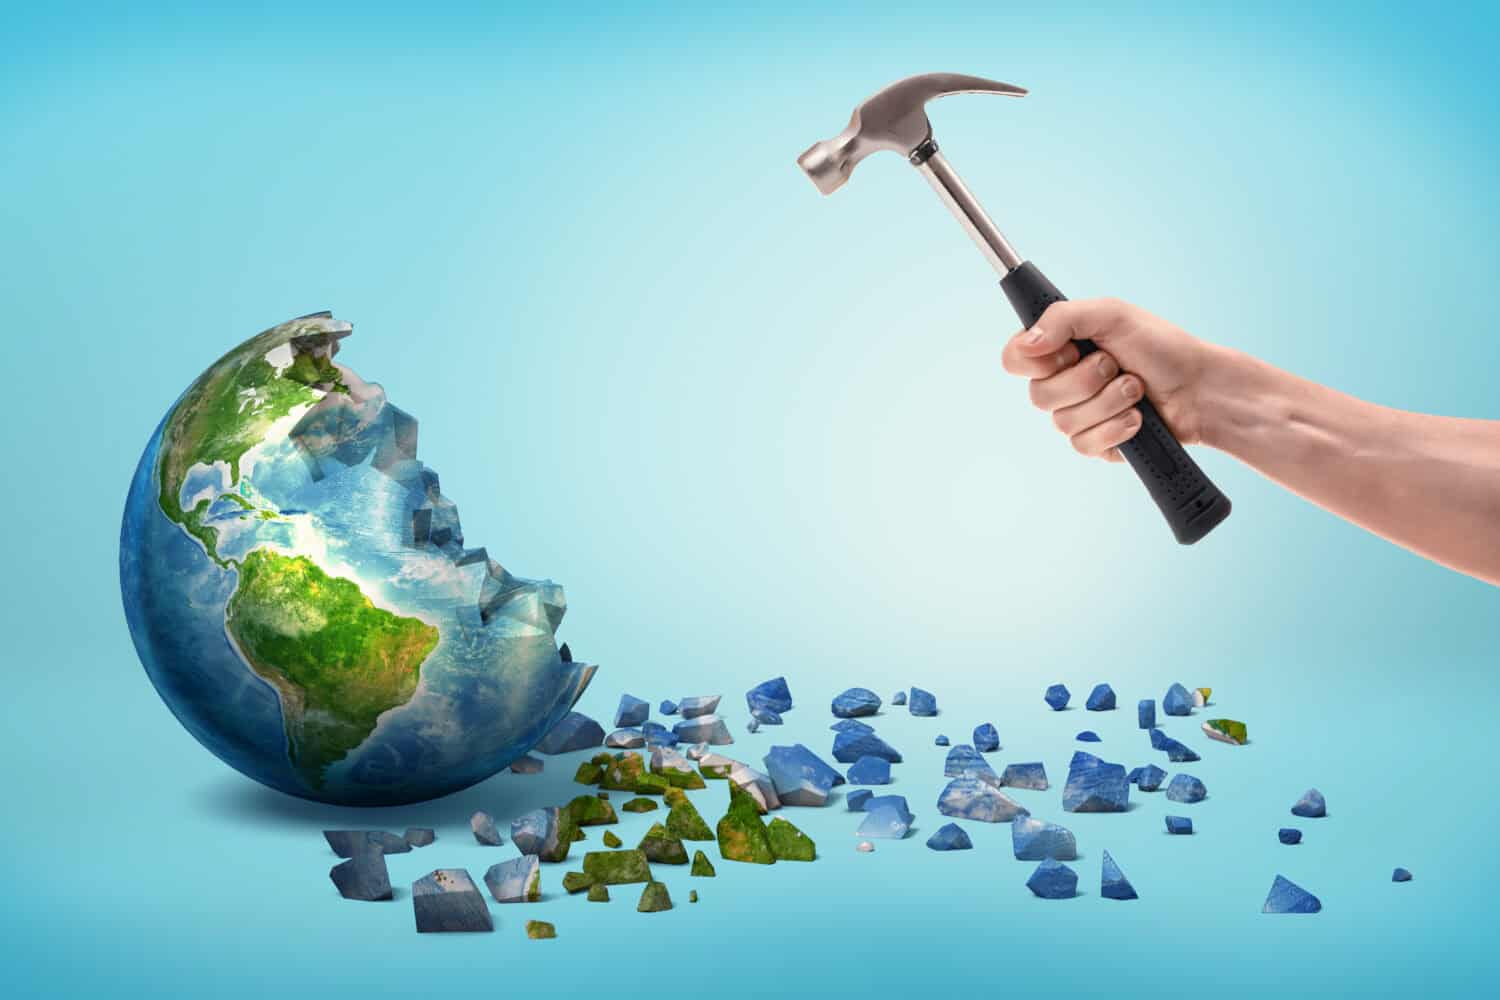 A male hand holds a metal hammer near a semi-broken Earth globe with small pieces fallen out of it. Human vs Earth. Environmental issues. Destroying the Earth.